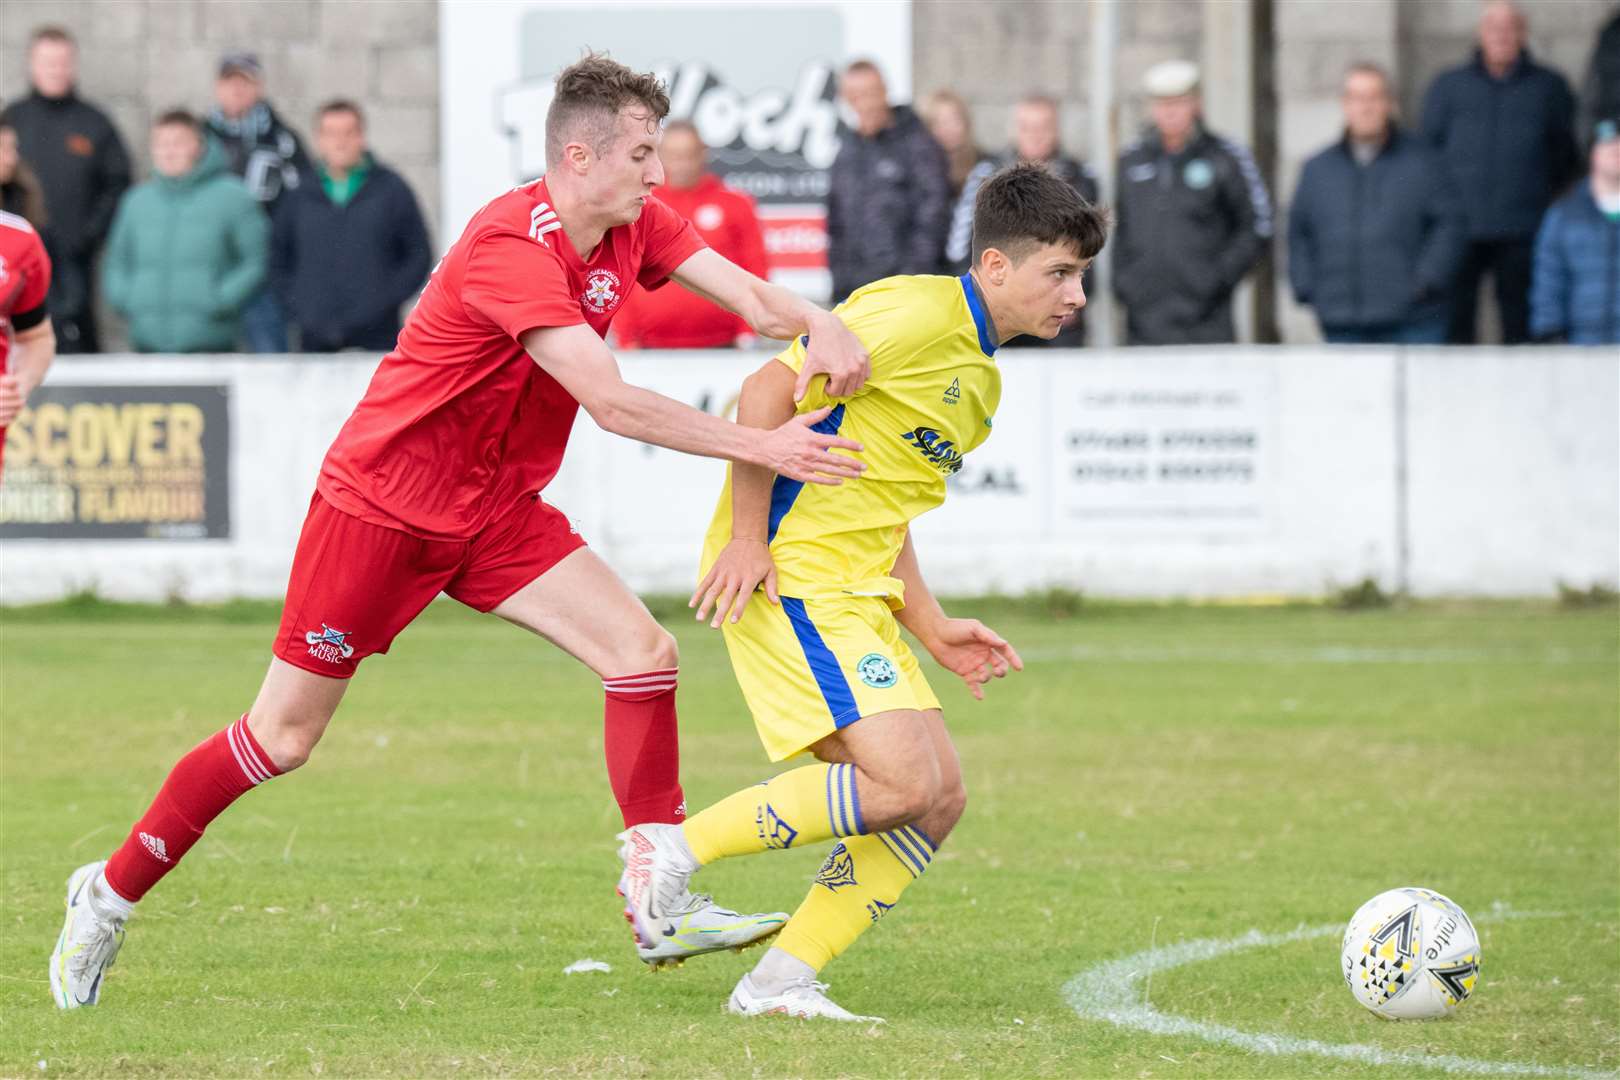 Lossiemouth's Ross Morrison closes in on Buckie's Max Barry. Picture: Daniel Forsyth..